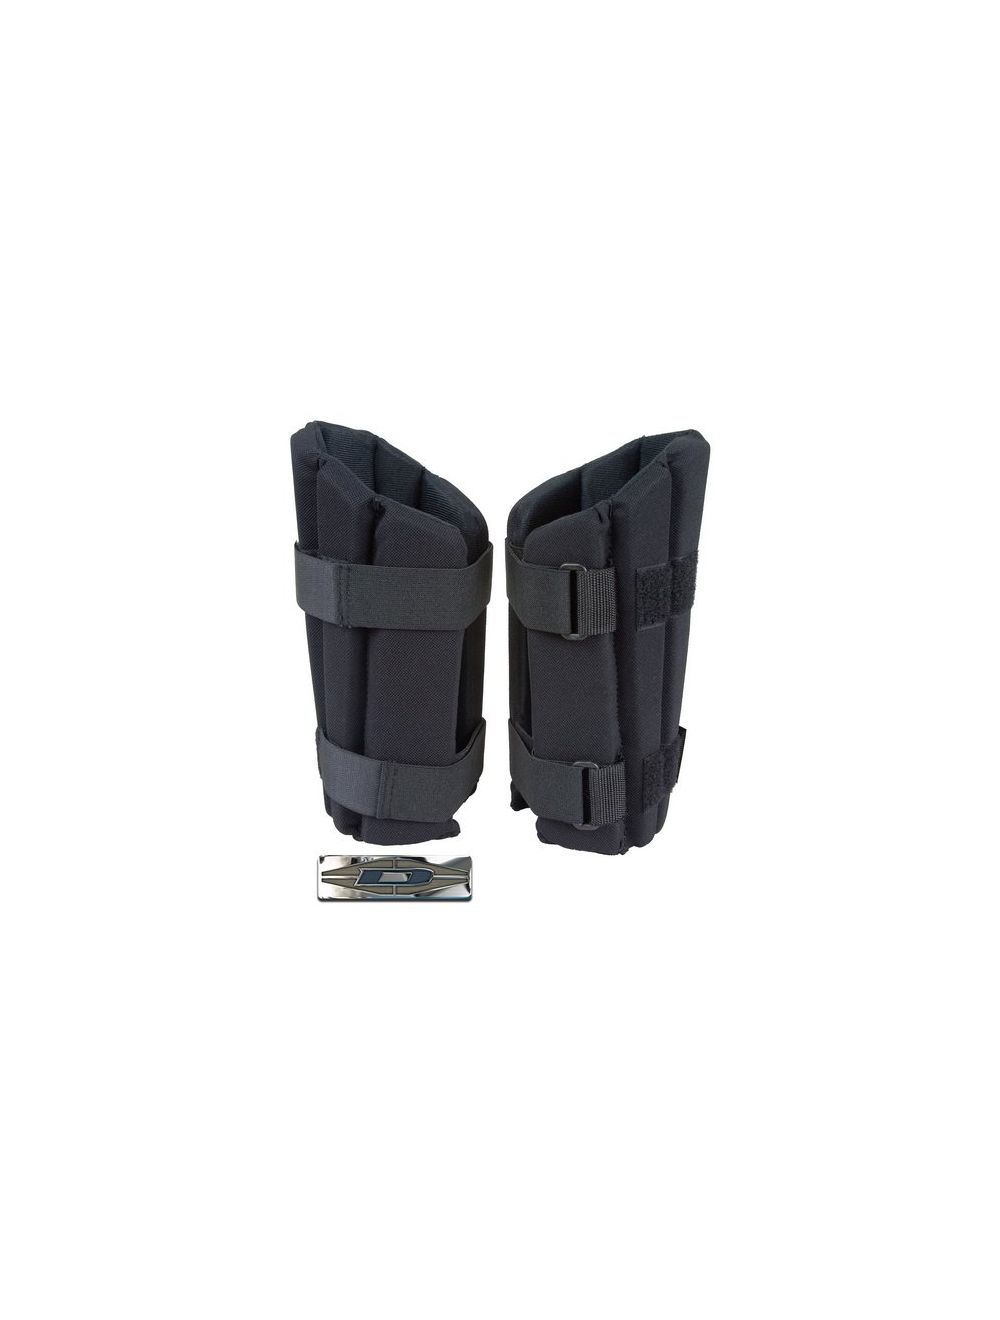 Imperial Forearm Protectors